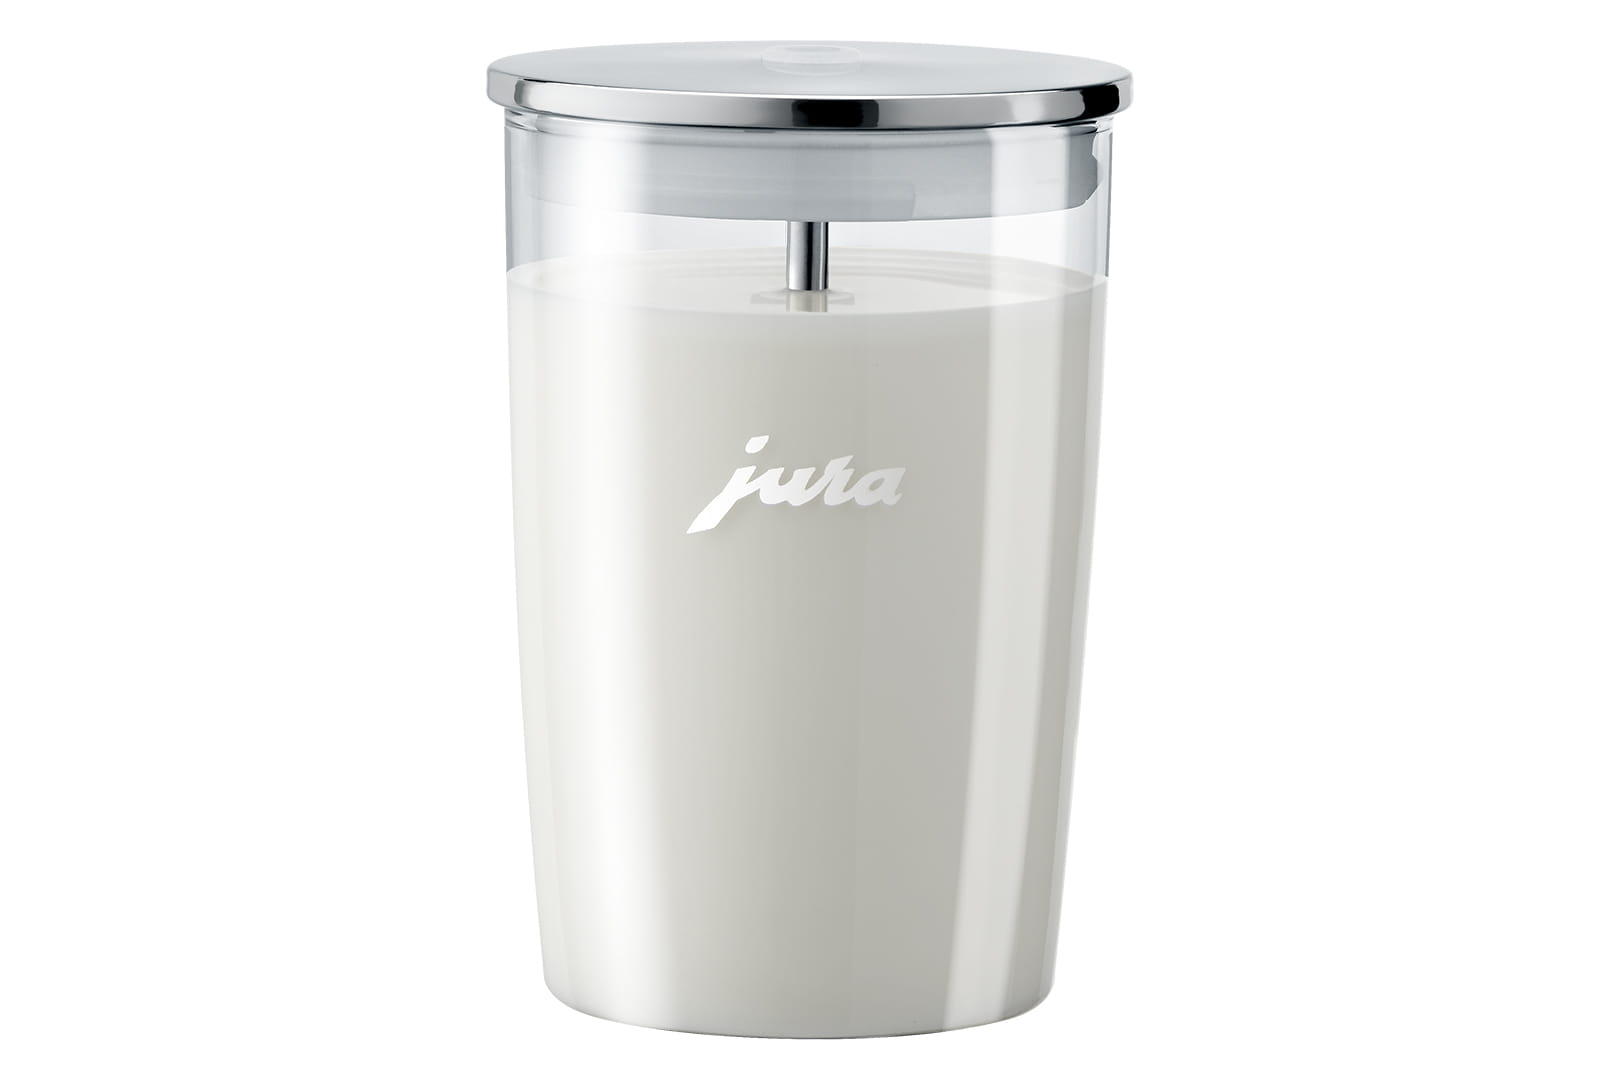 https://de.jura.com/-/media/global/images/home-products/accessories/Glass-milk-container/gallery/gallery2.jpg